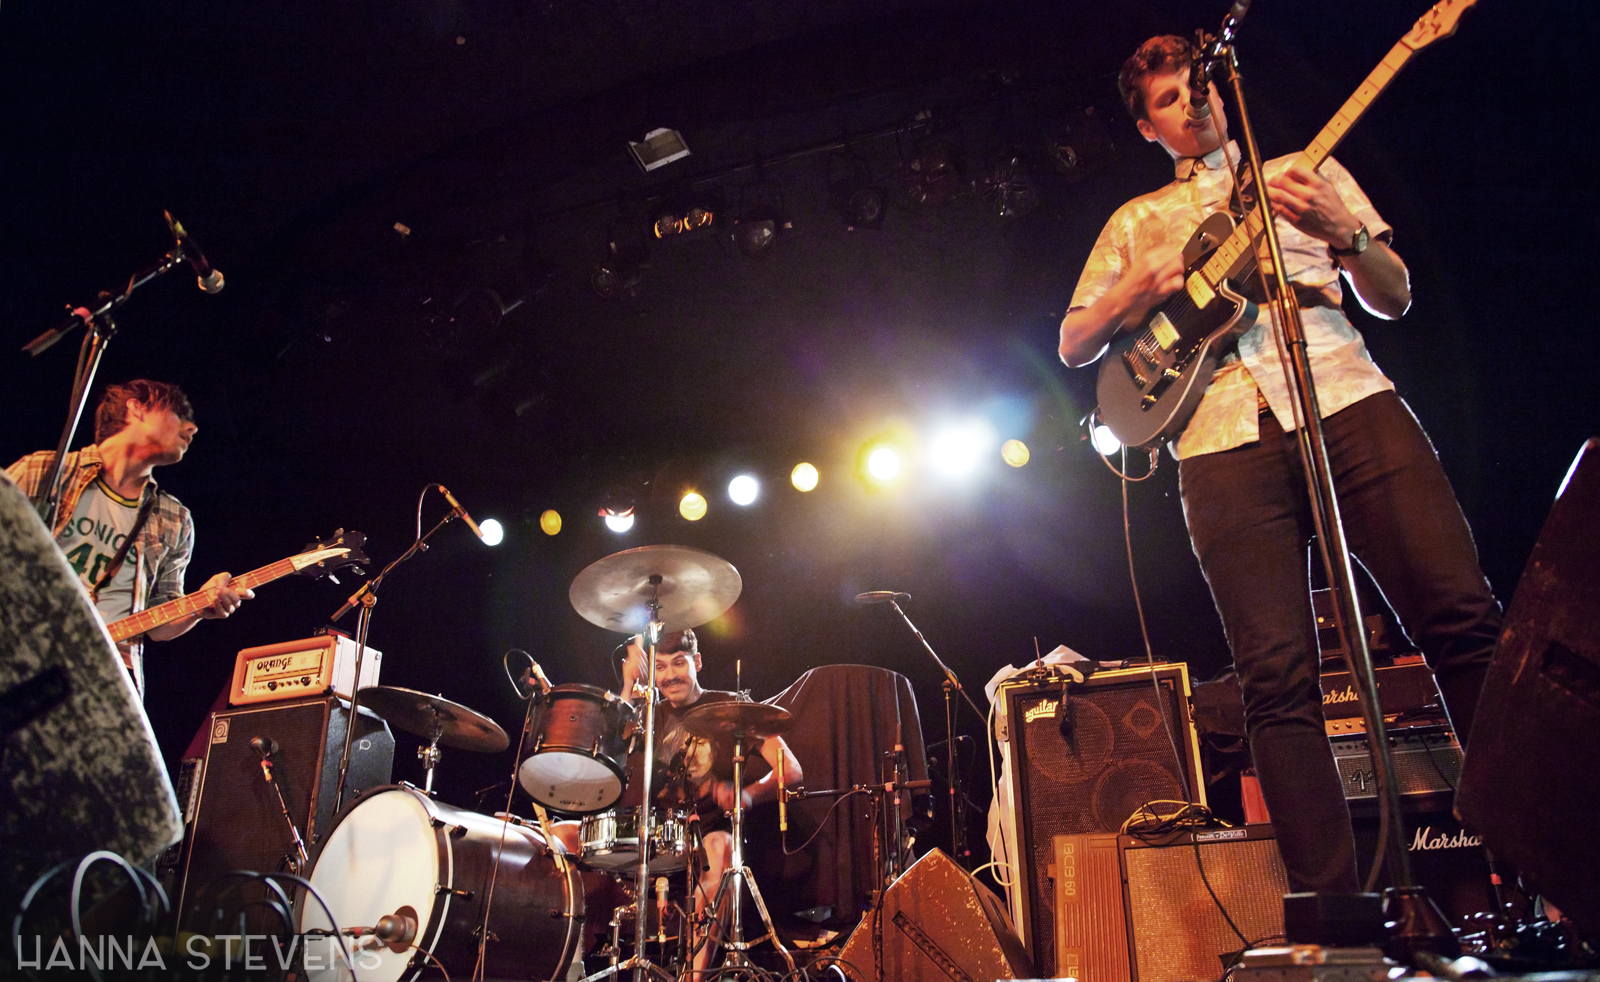 You Blew It at the Showbox Market (Photo by Hanna Stevens)